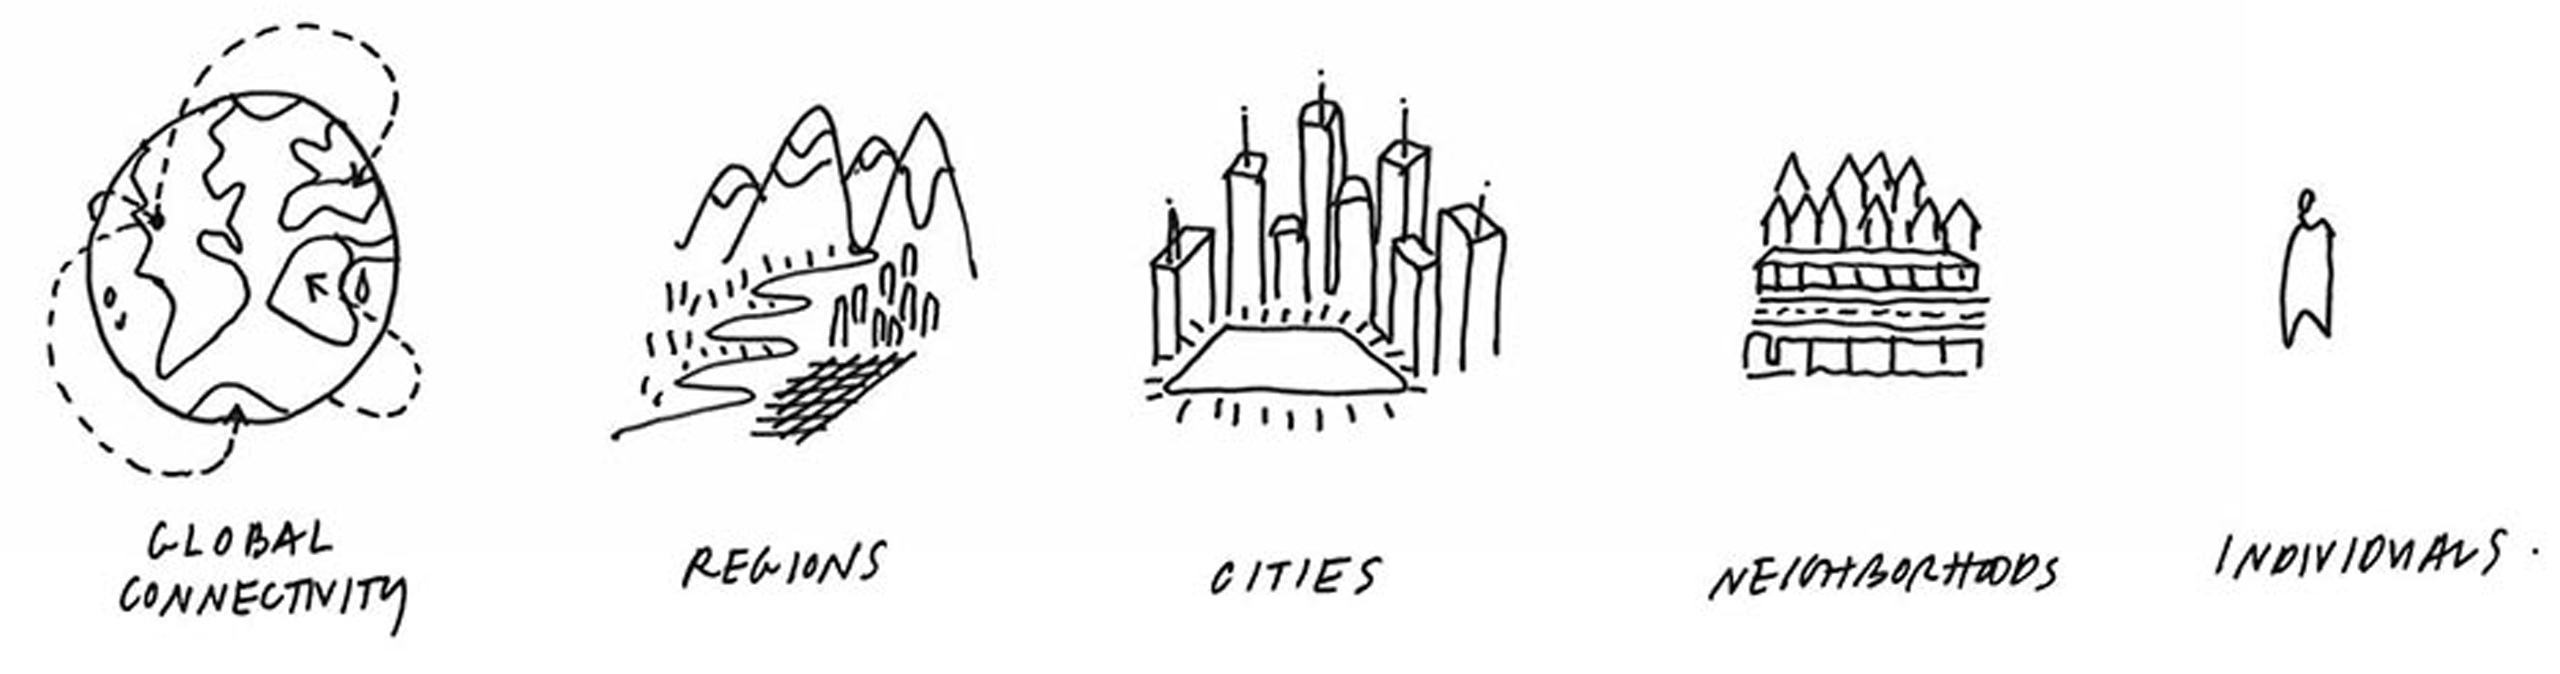 drawing showing icons for global connectivity, regions, cities, neighborhoods, and individuals